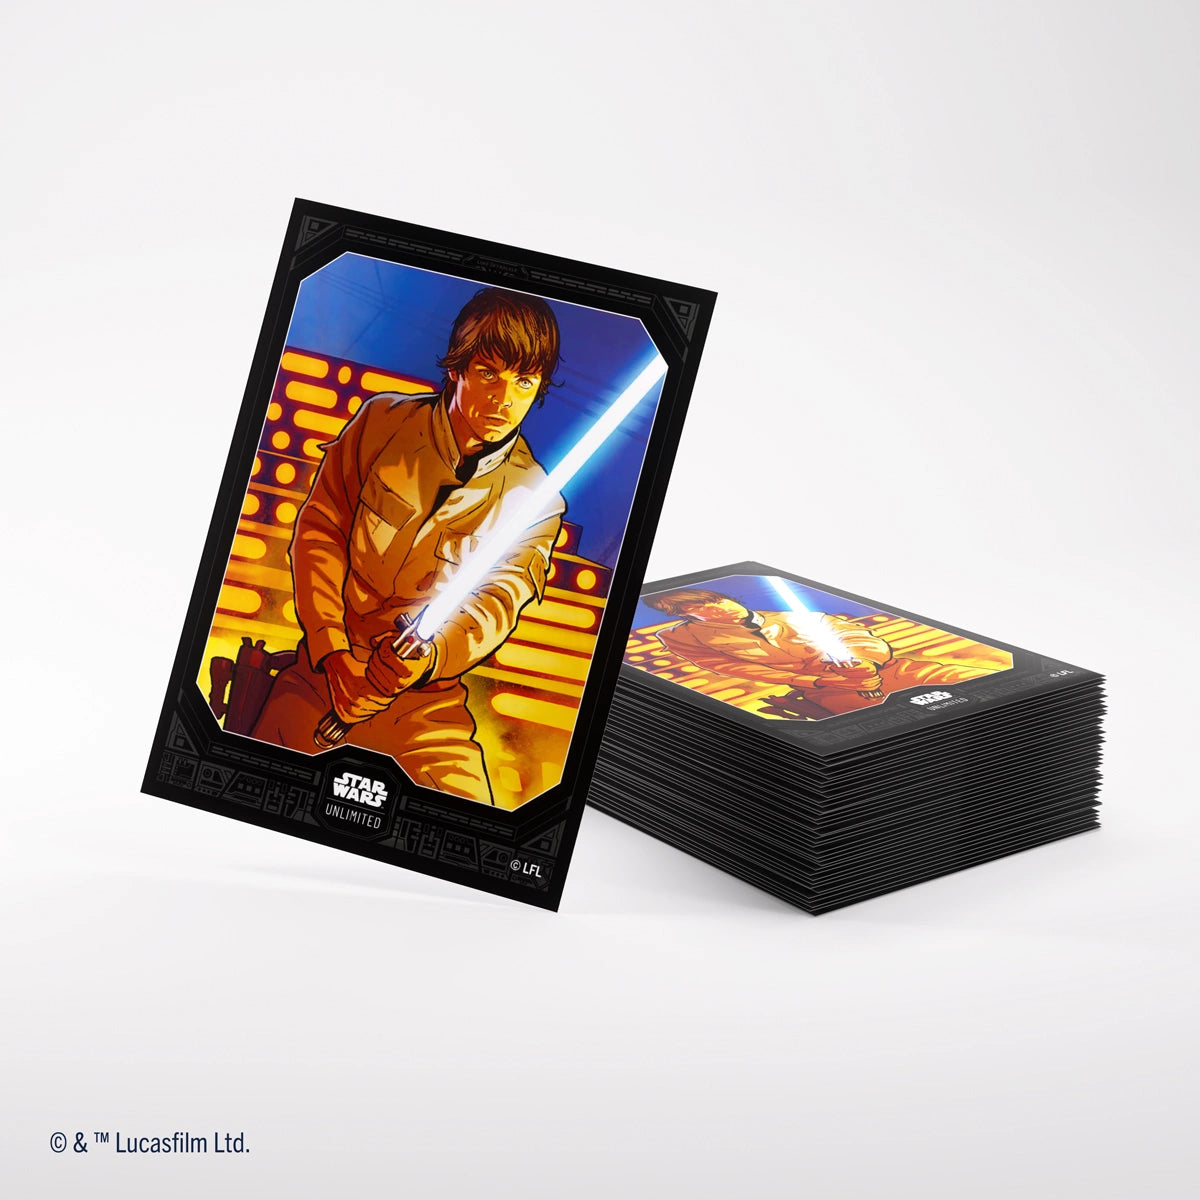 GAMEGENIC - STAR WARS: UNLIMITED ART SLEEVES DOUBLE SLEEVING PACK